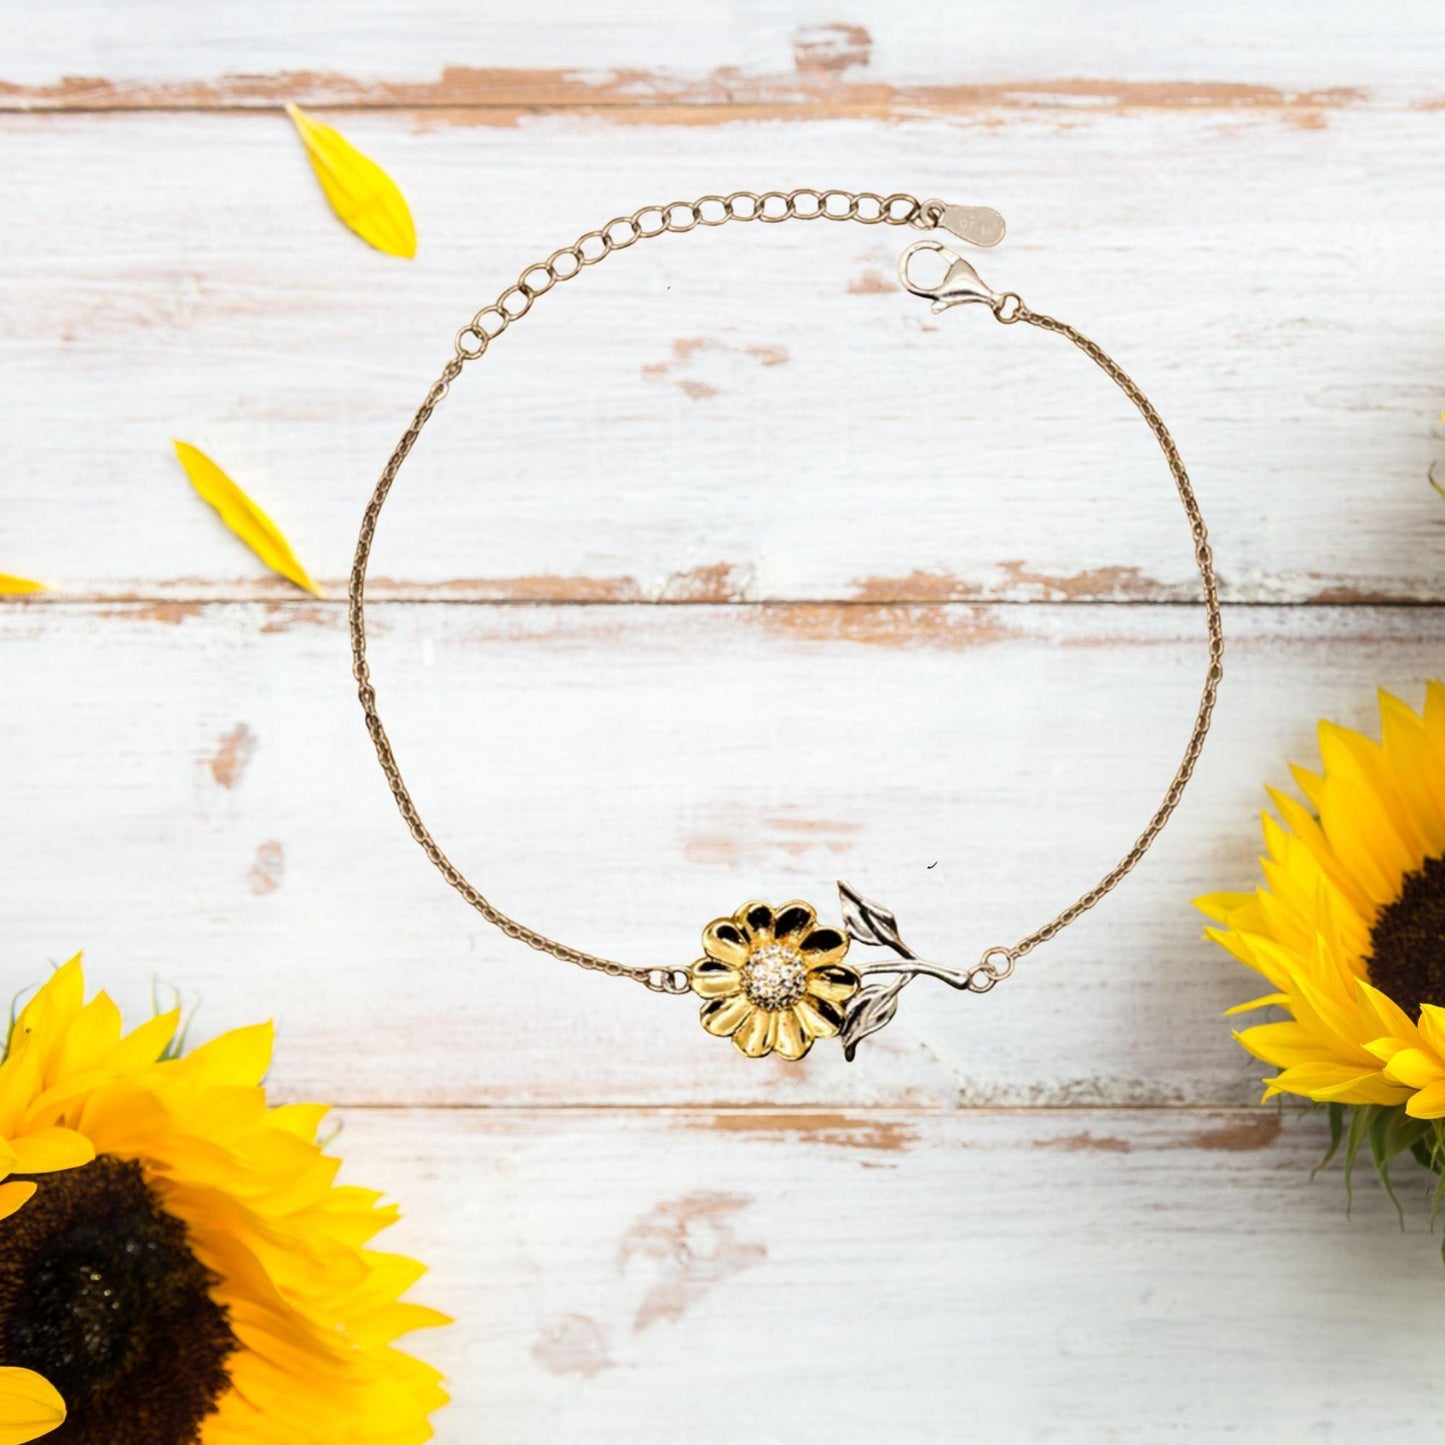 Remarkable Groundskeeper Gifts, Your dedication and hard work, Inspirational Birthday Christmas Unique Sunflower Bracelet For Groundskeeper, Coworkers, Men, Women, Friends - Mallard Moon Gift Shop